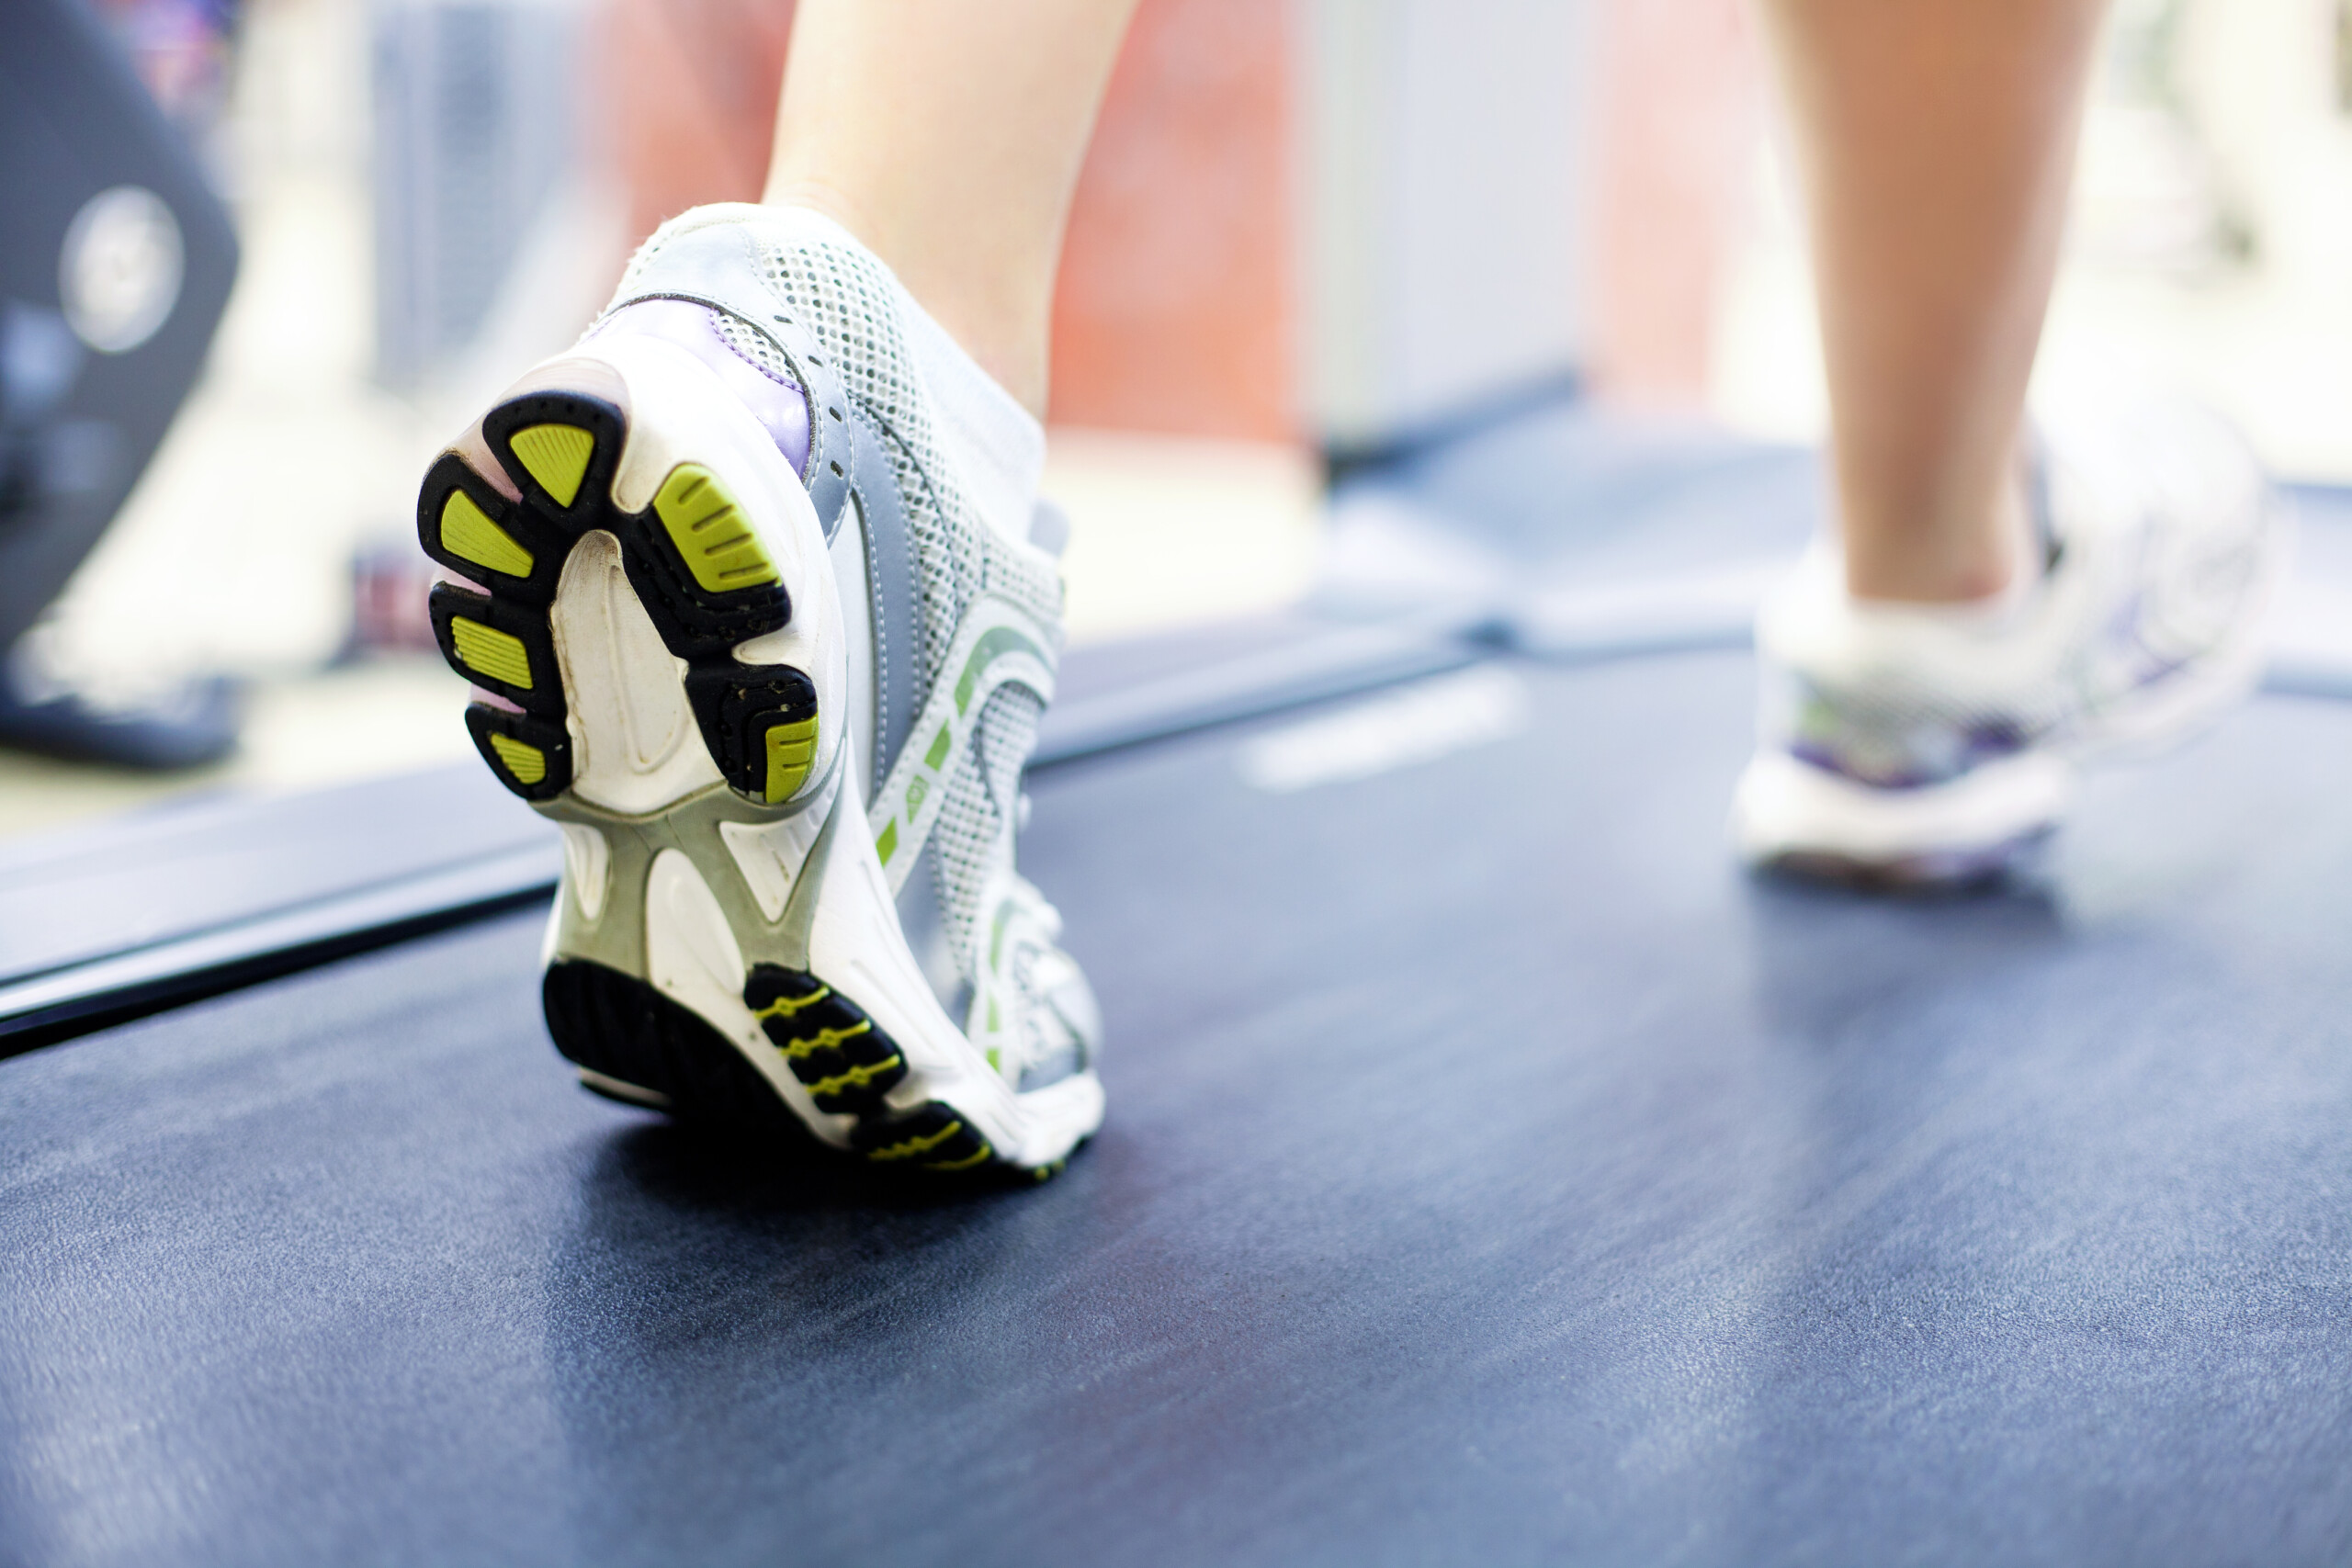 Treadmill Workouts with a Negative Incline